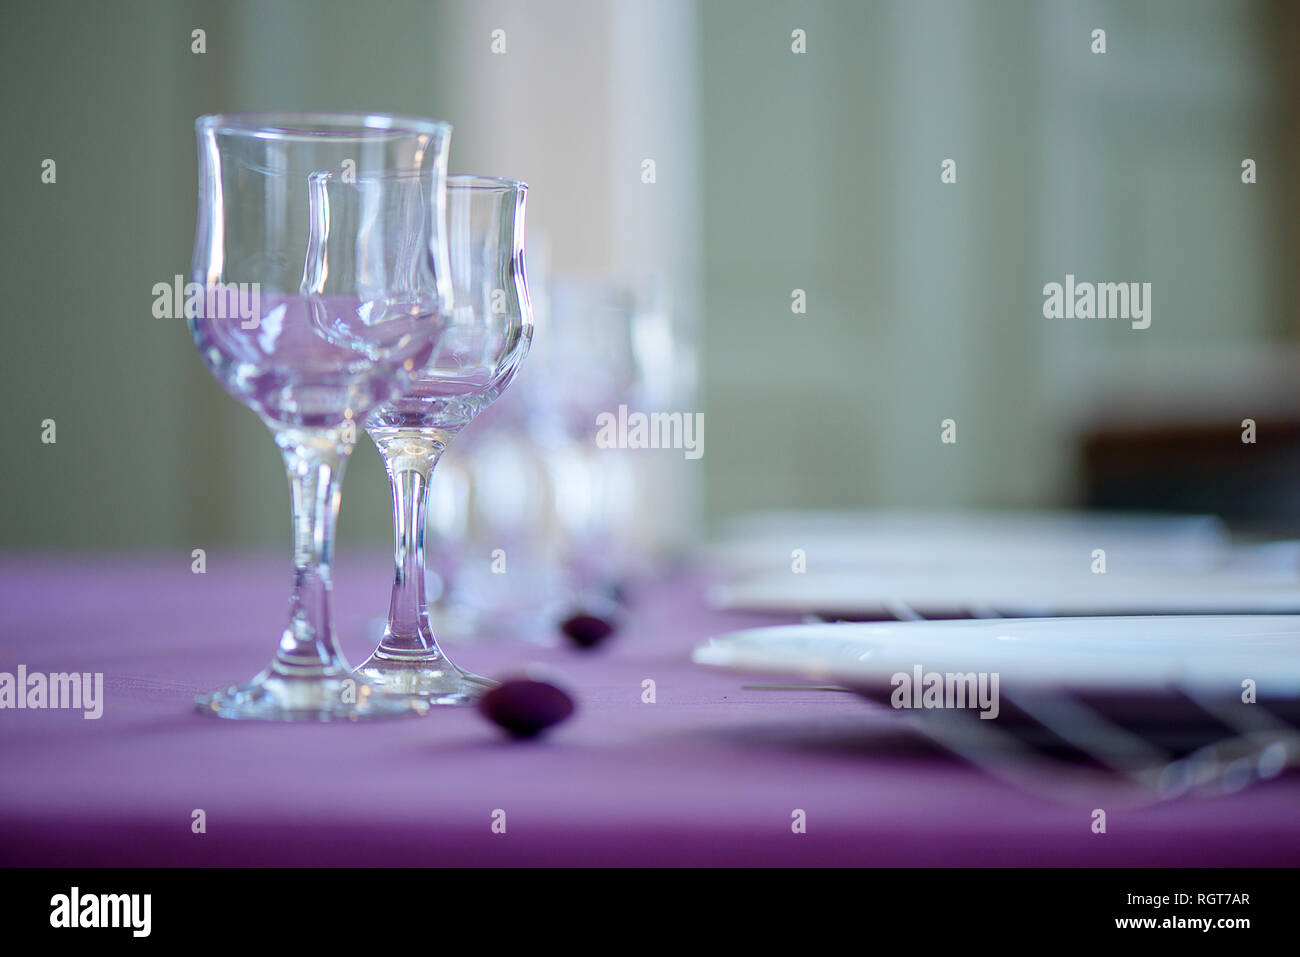 Clean table setting for fine dining with striking, elegant purple table cloth and focus on two crystal glasses for water and wine and white china Stock Photo